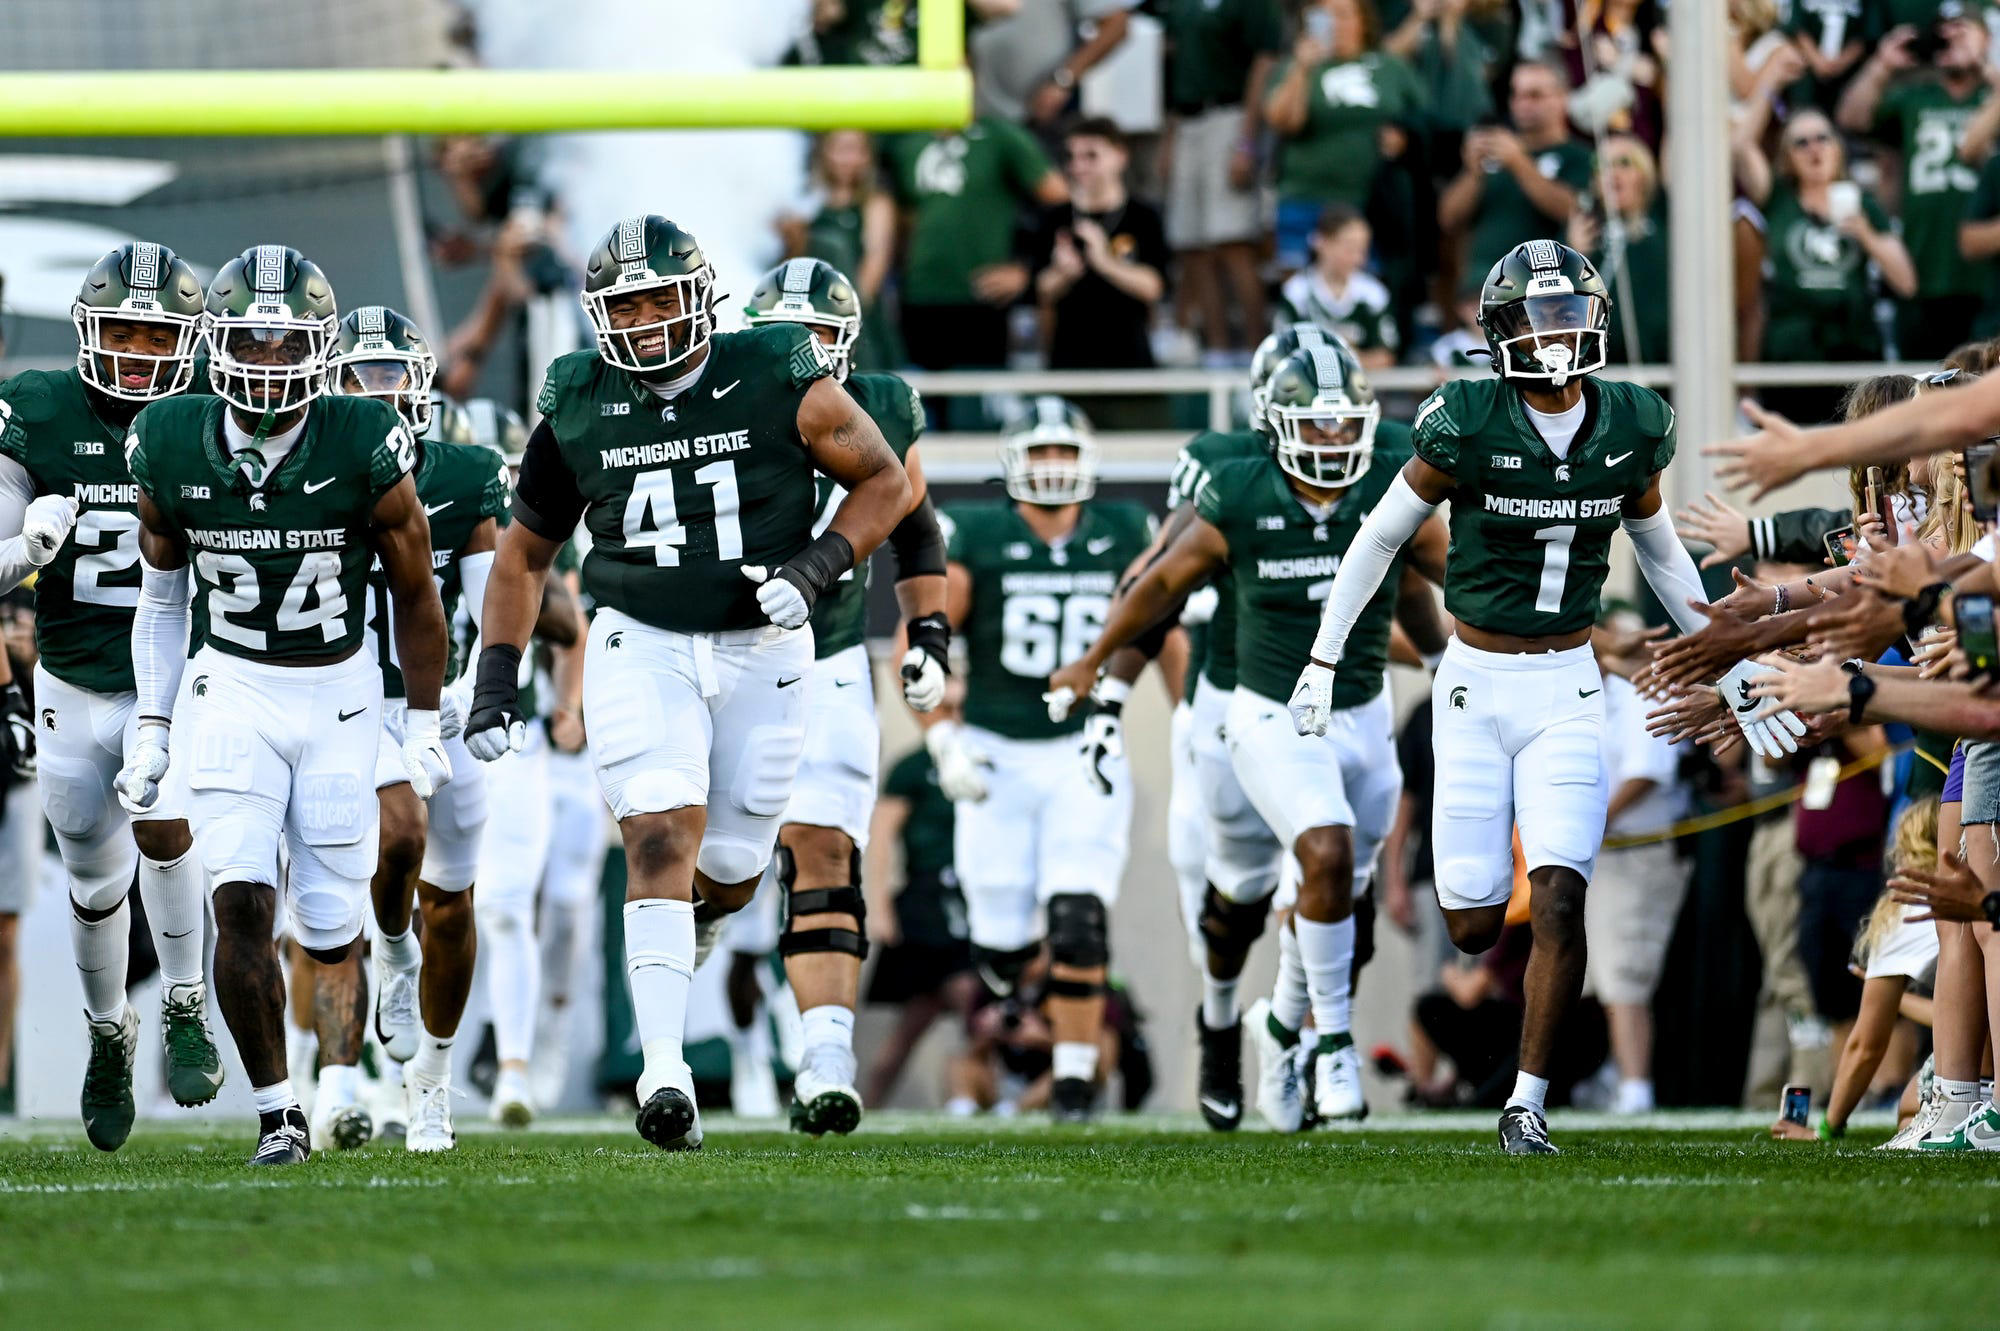 Couch Michigan State football coaching search is a defining period for